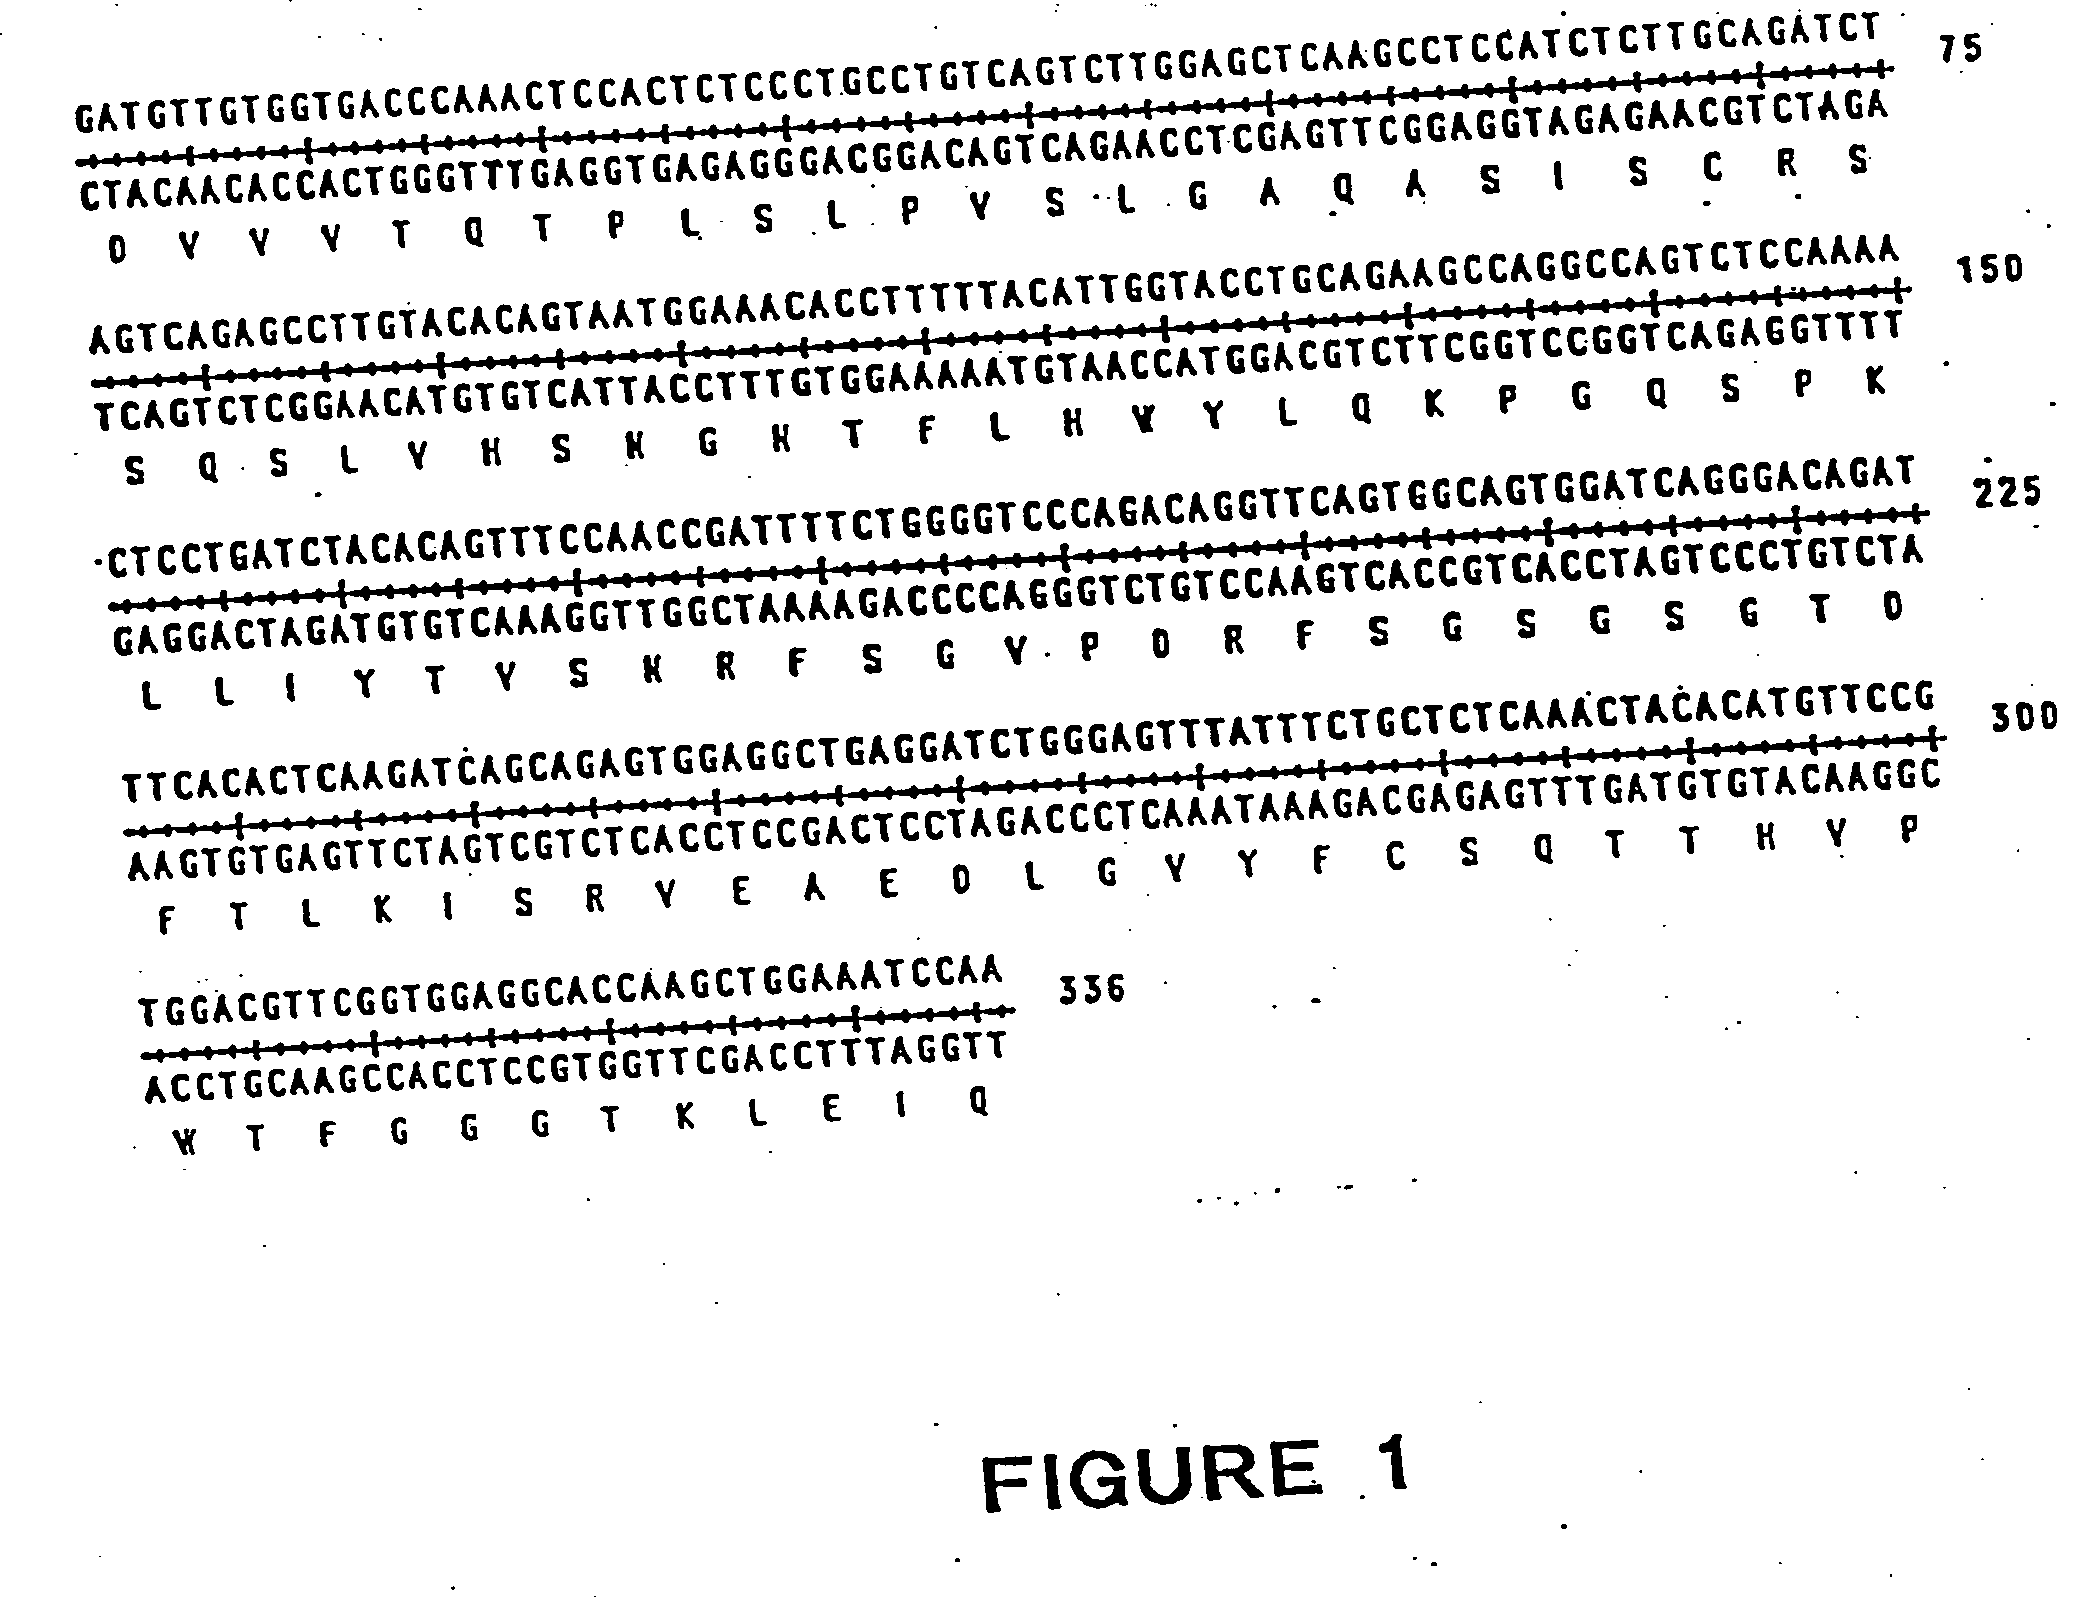 Methods for the treatment or prevention of immune disorders using anti-CD40 antibodies